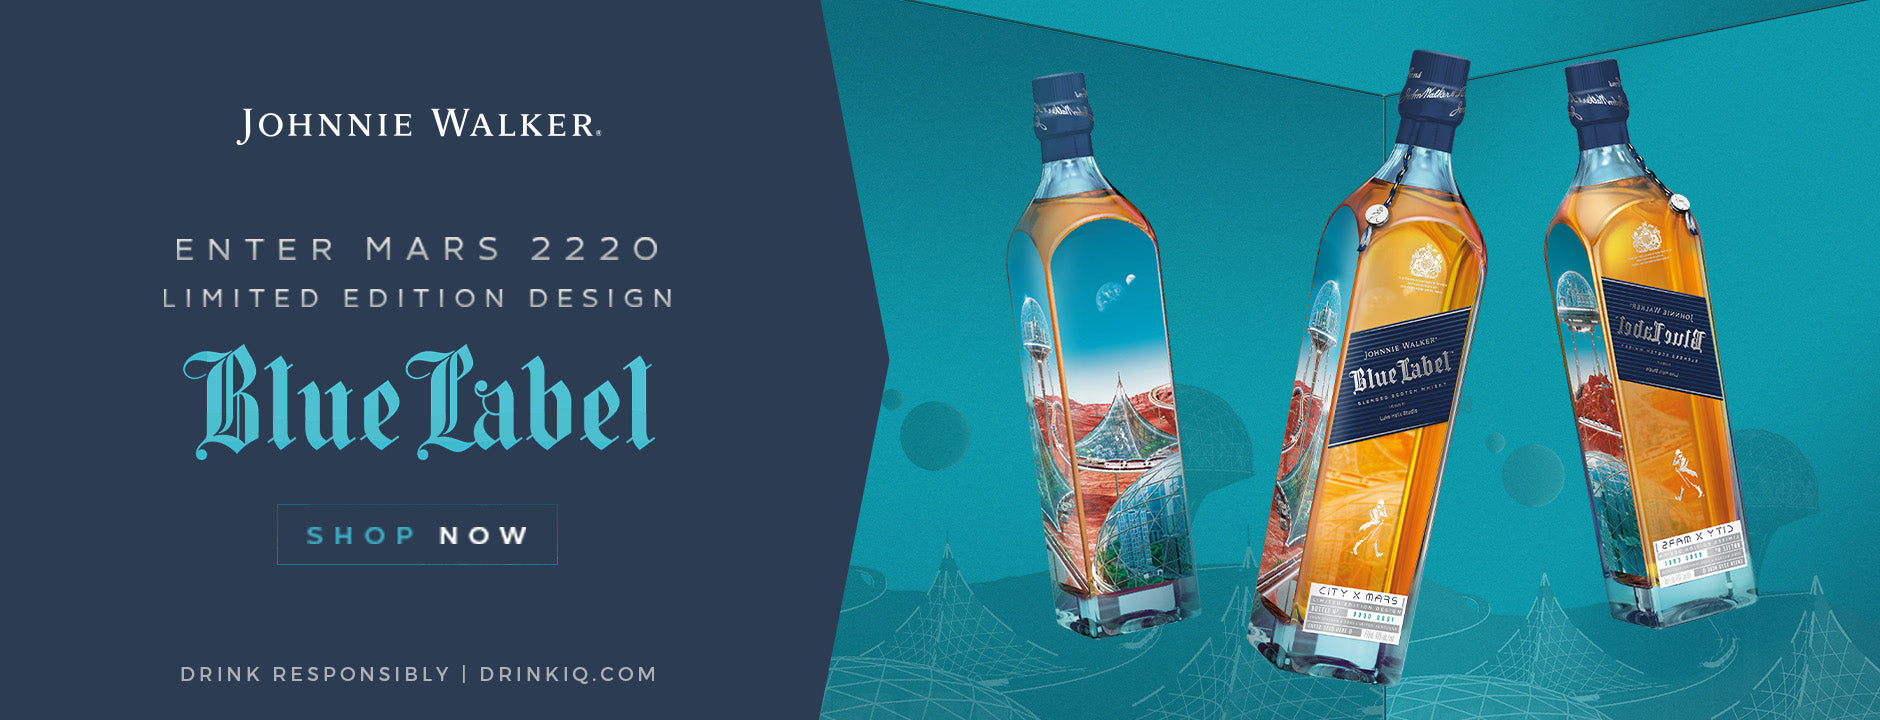 Johnnie Walker Blue Label Cities of the Future – Mars 2220 Edition